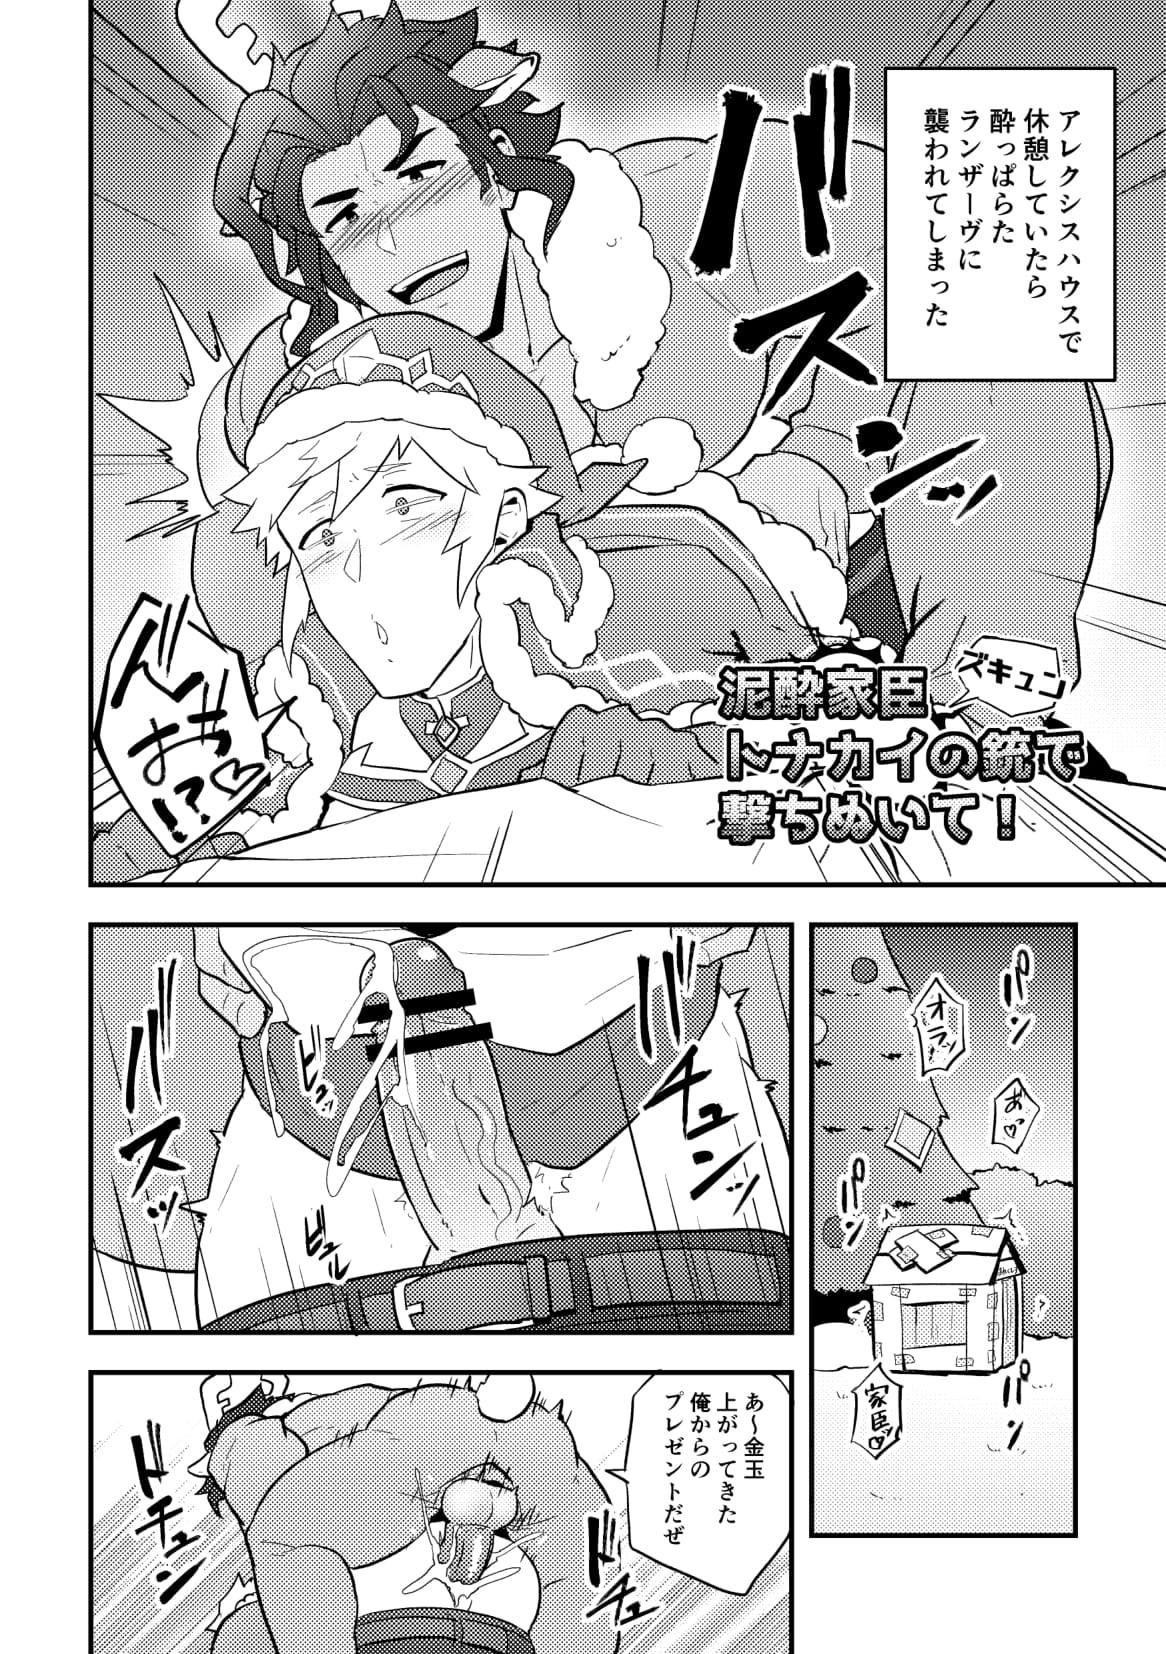 Oral Onabe Hon C95 - The idolmaster Fate grand order Granblue fantasy Pokemon Fire emblem Castlevania Dragalia lost Punch out Shower - Page 6